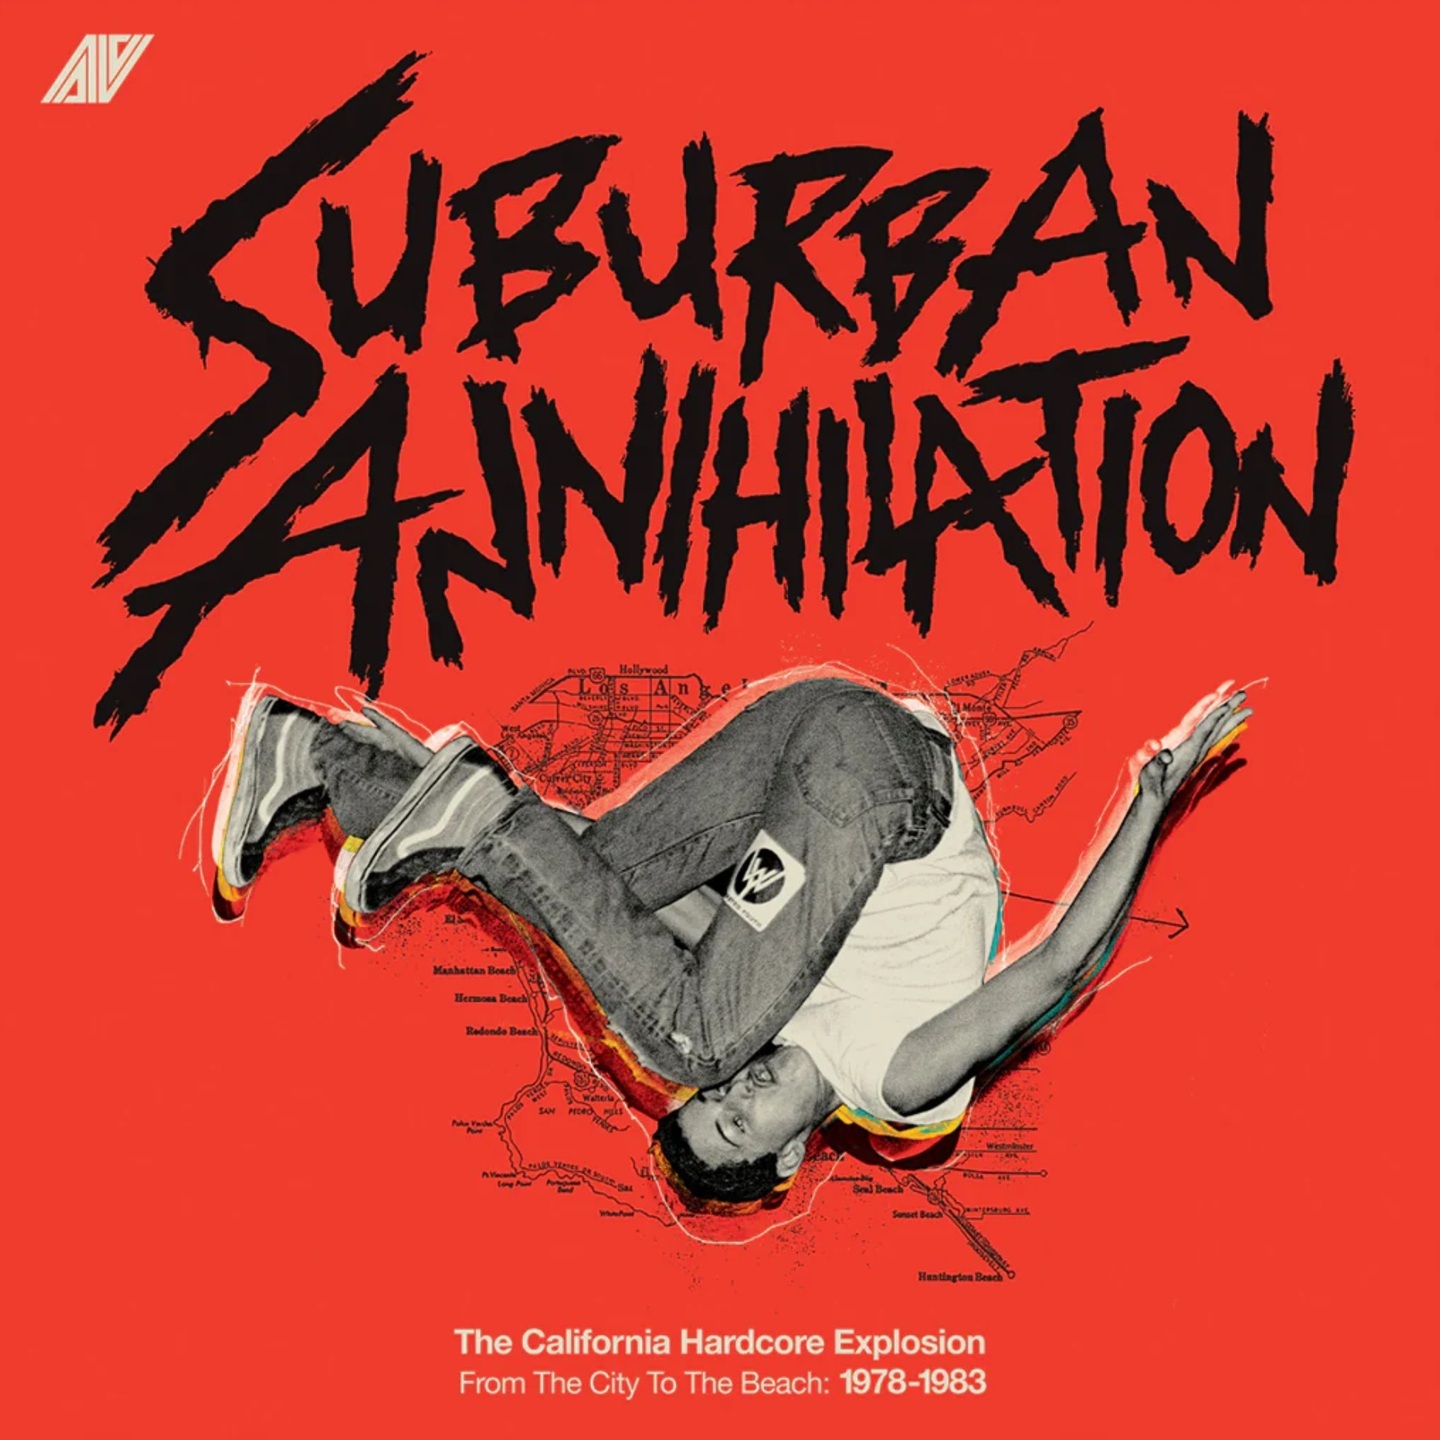 V/A	- Suburban Annihalation (The California Hardcore Explosion From The City To The Beach: 1978-1983) 2xLP (Silver Black Marble Vinyl)